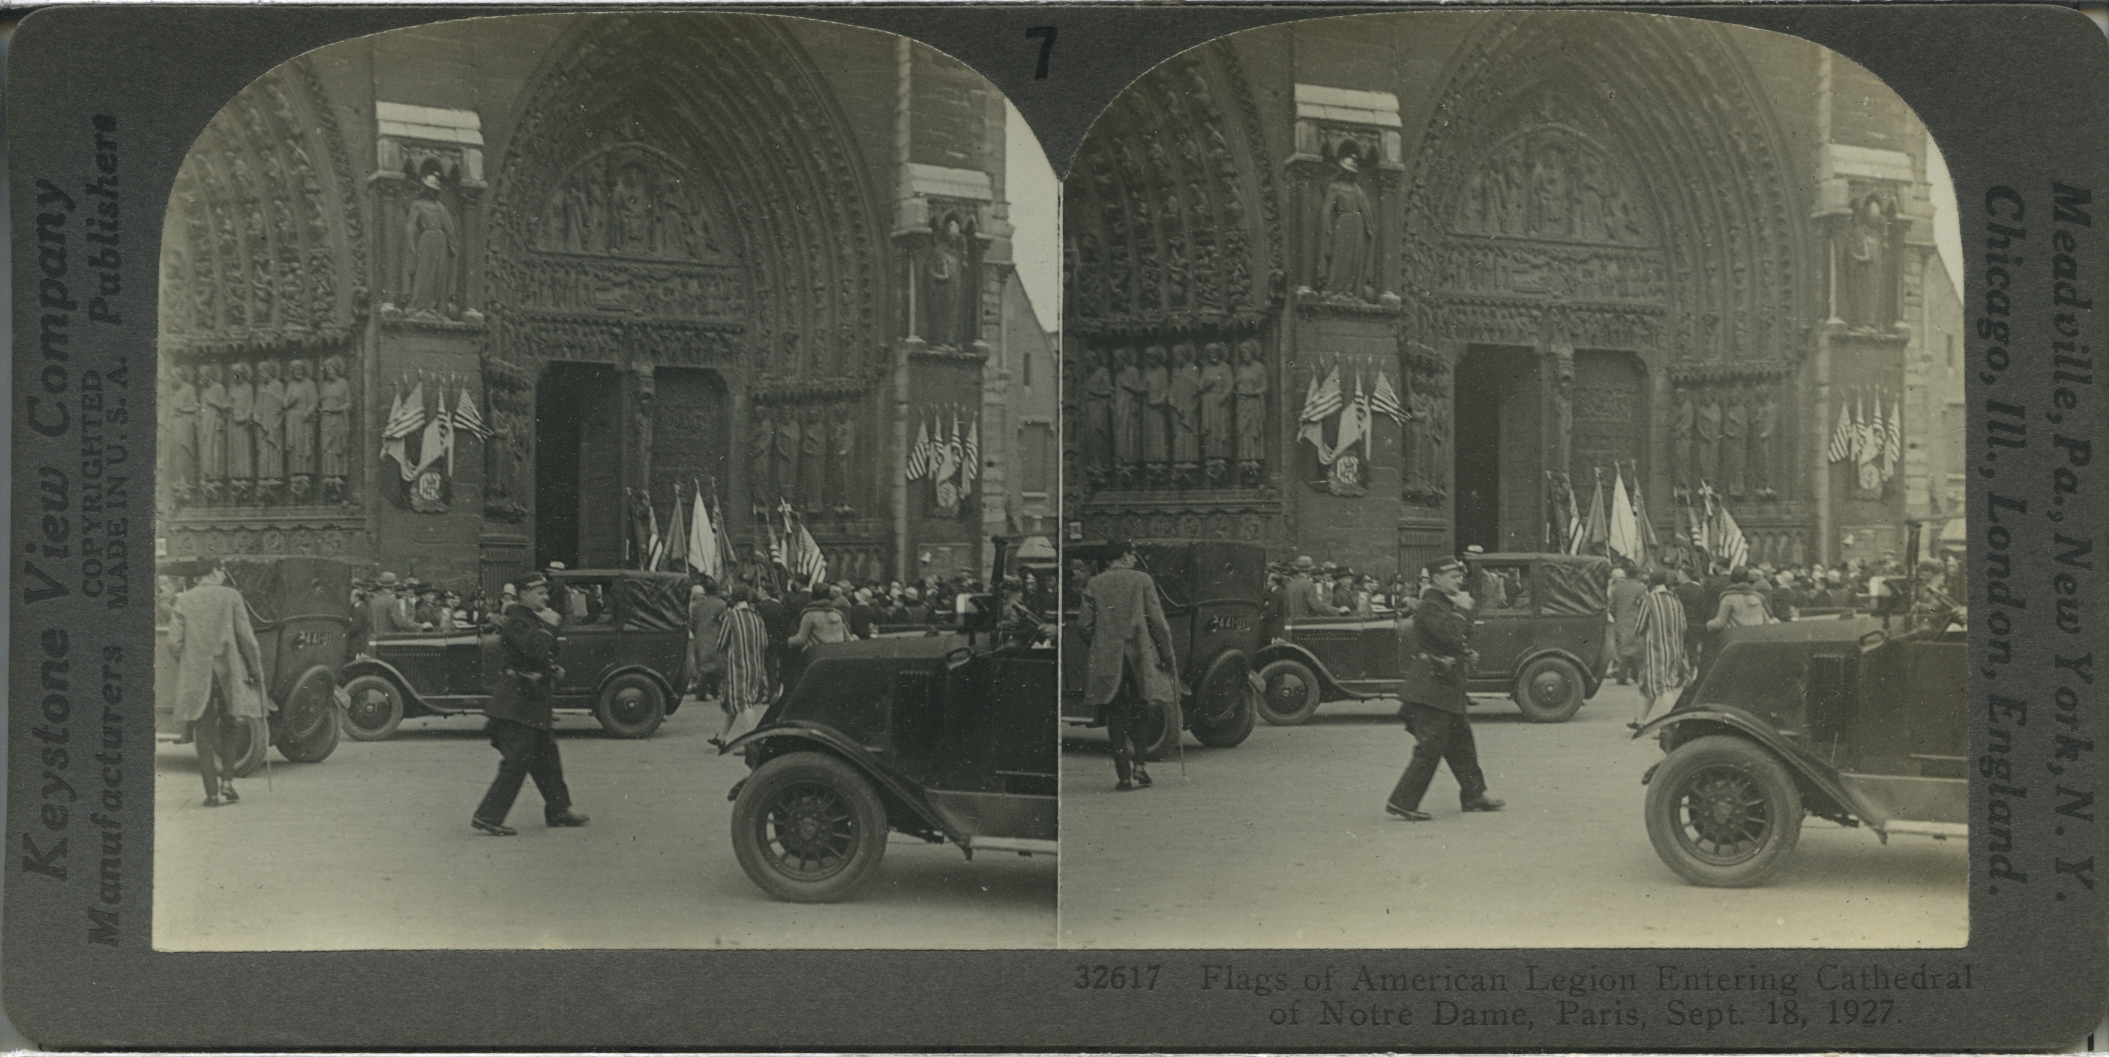 Flags of American Legion Entering Cathedral of Notre Dame, Paris, Sept. 18, 1927.